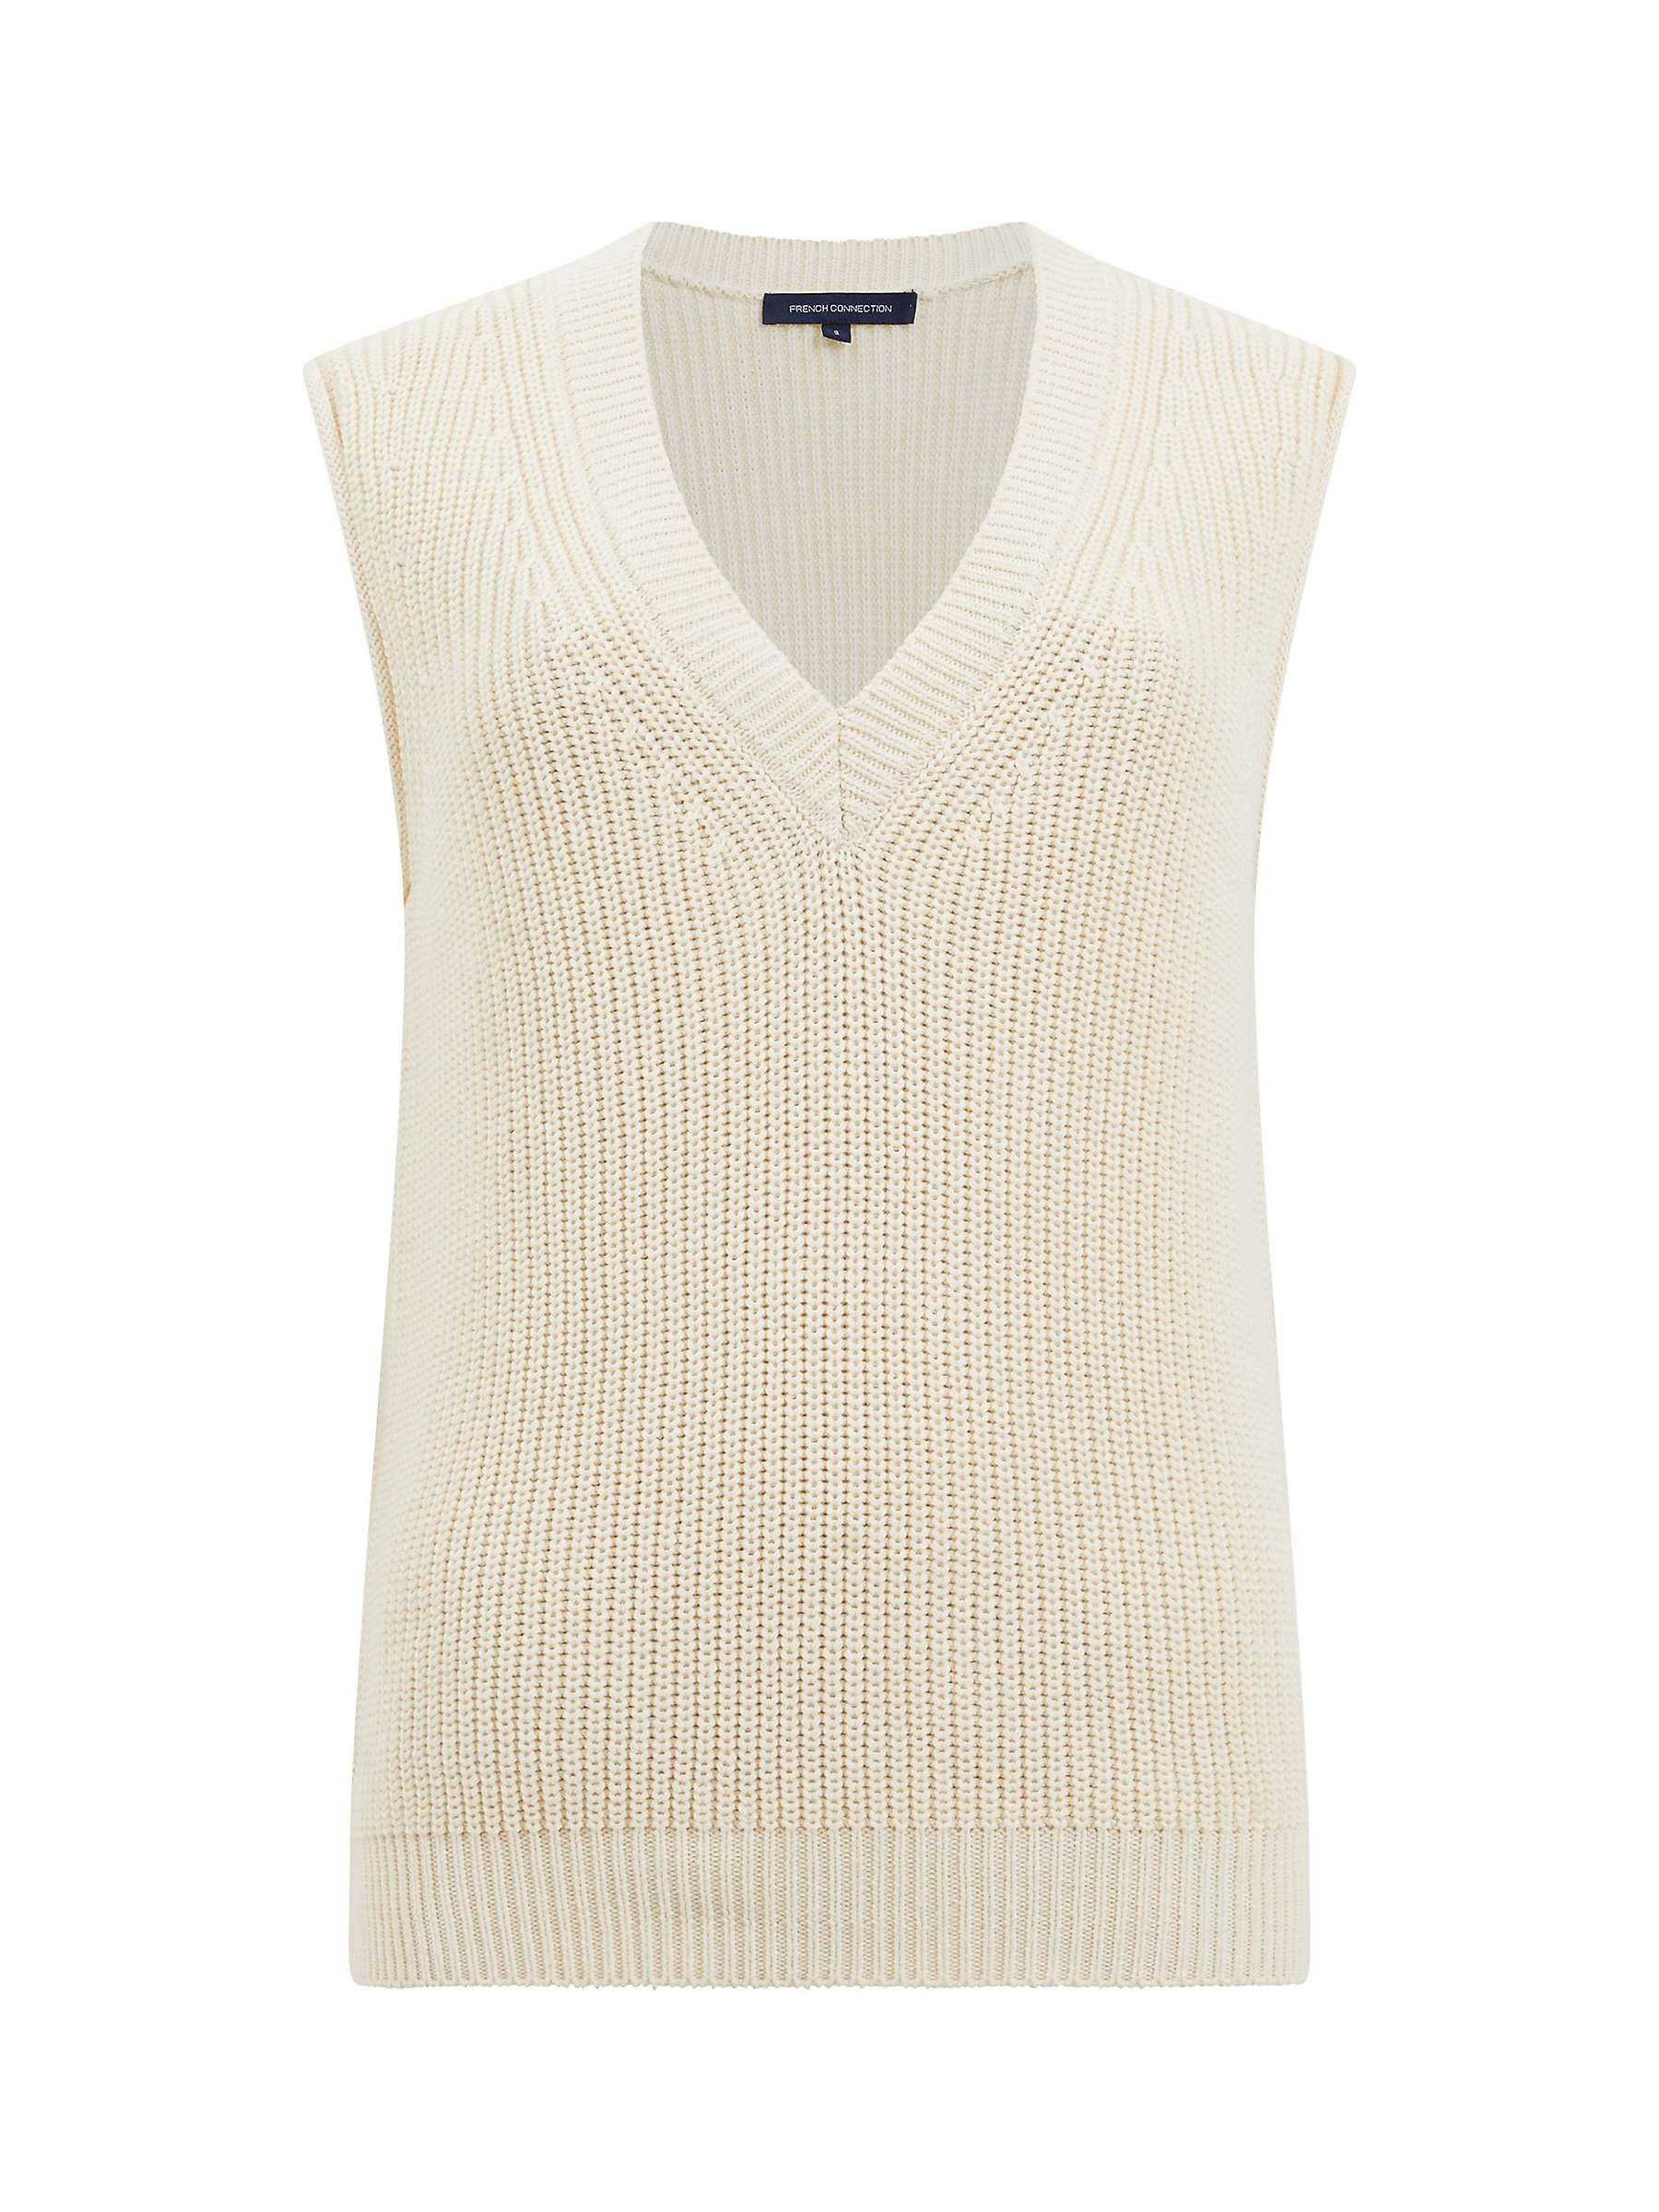 French Connection Lily Mozart Cotton Vest, Classic Cream at John Lewis ...